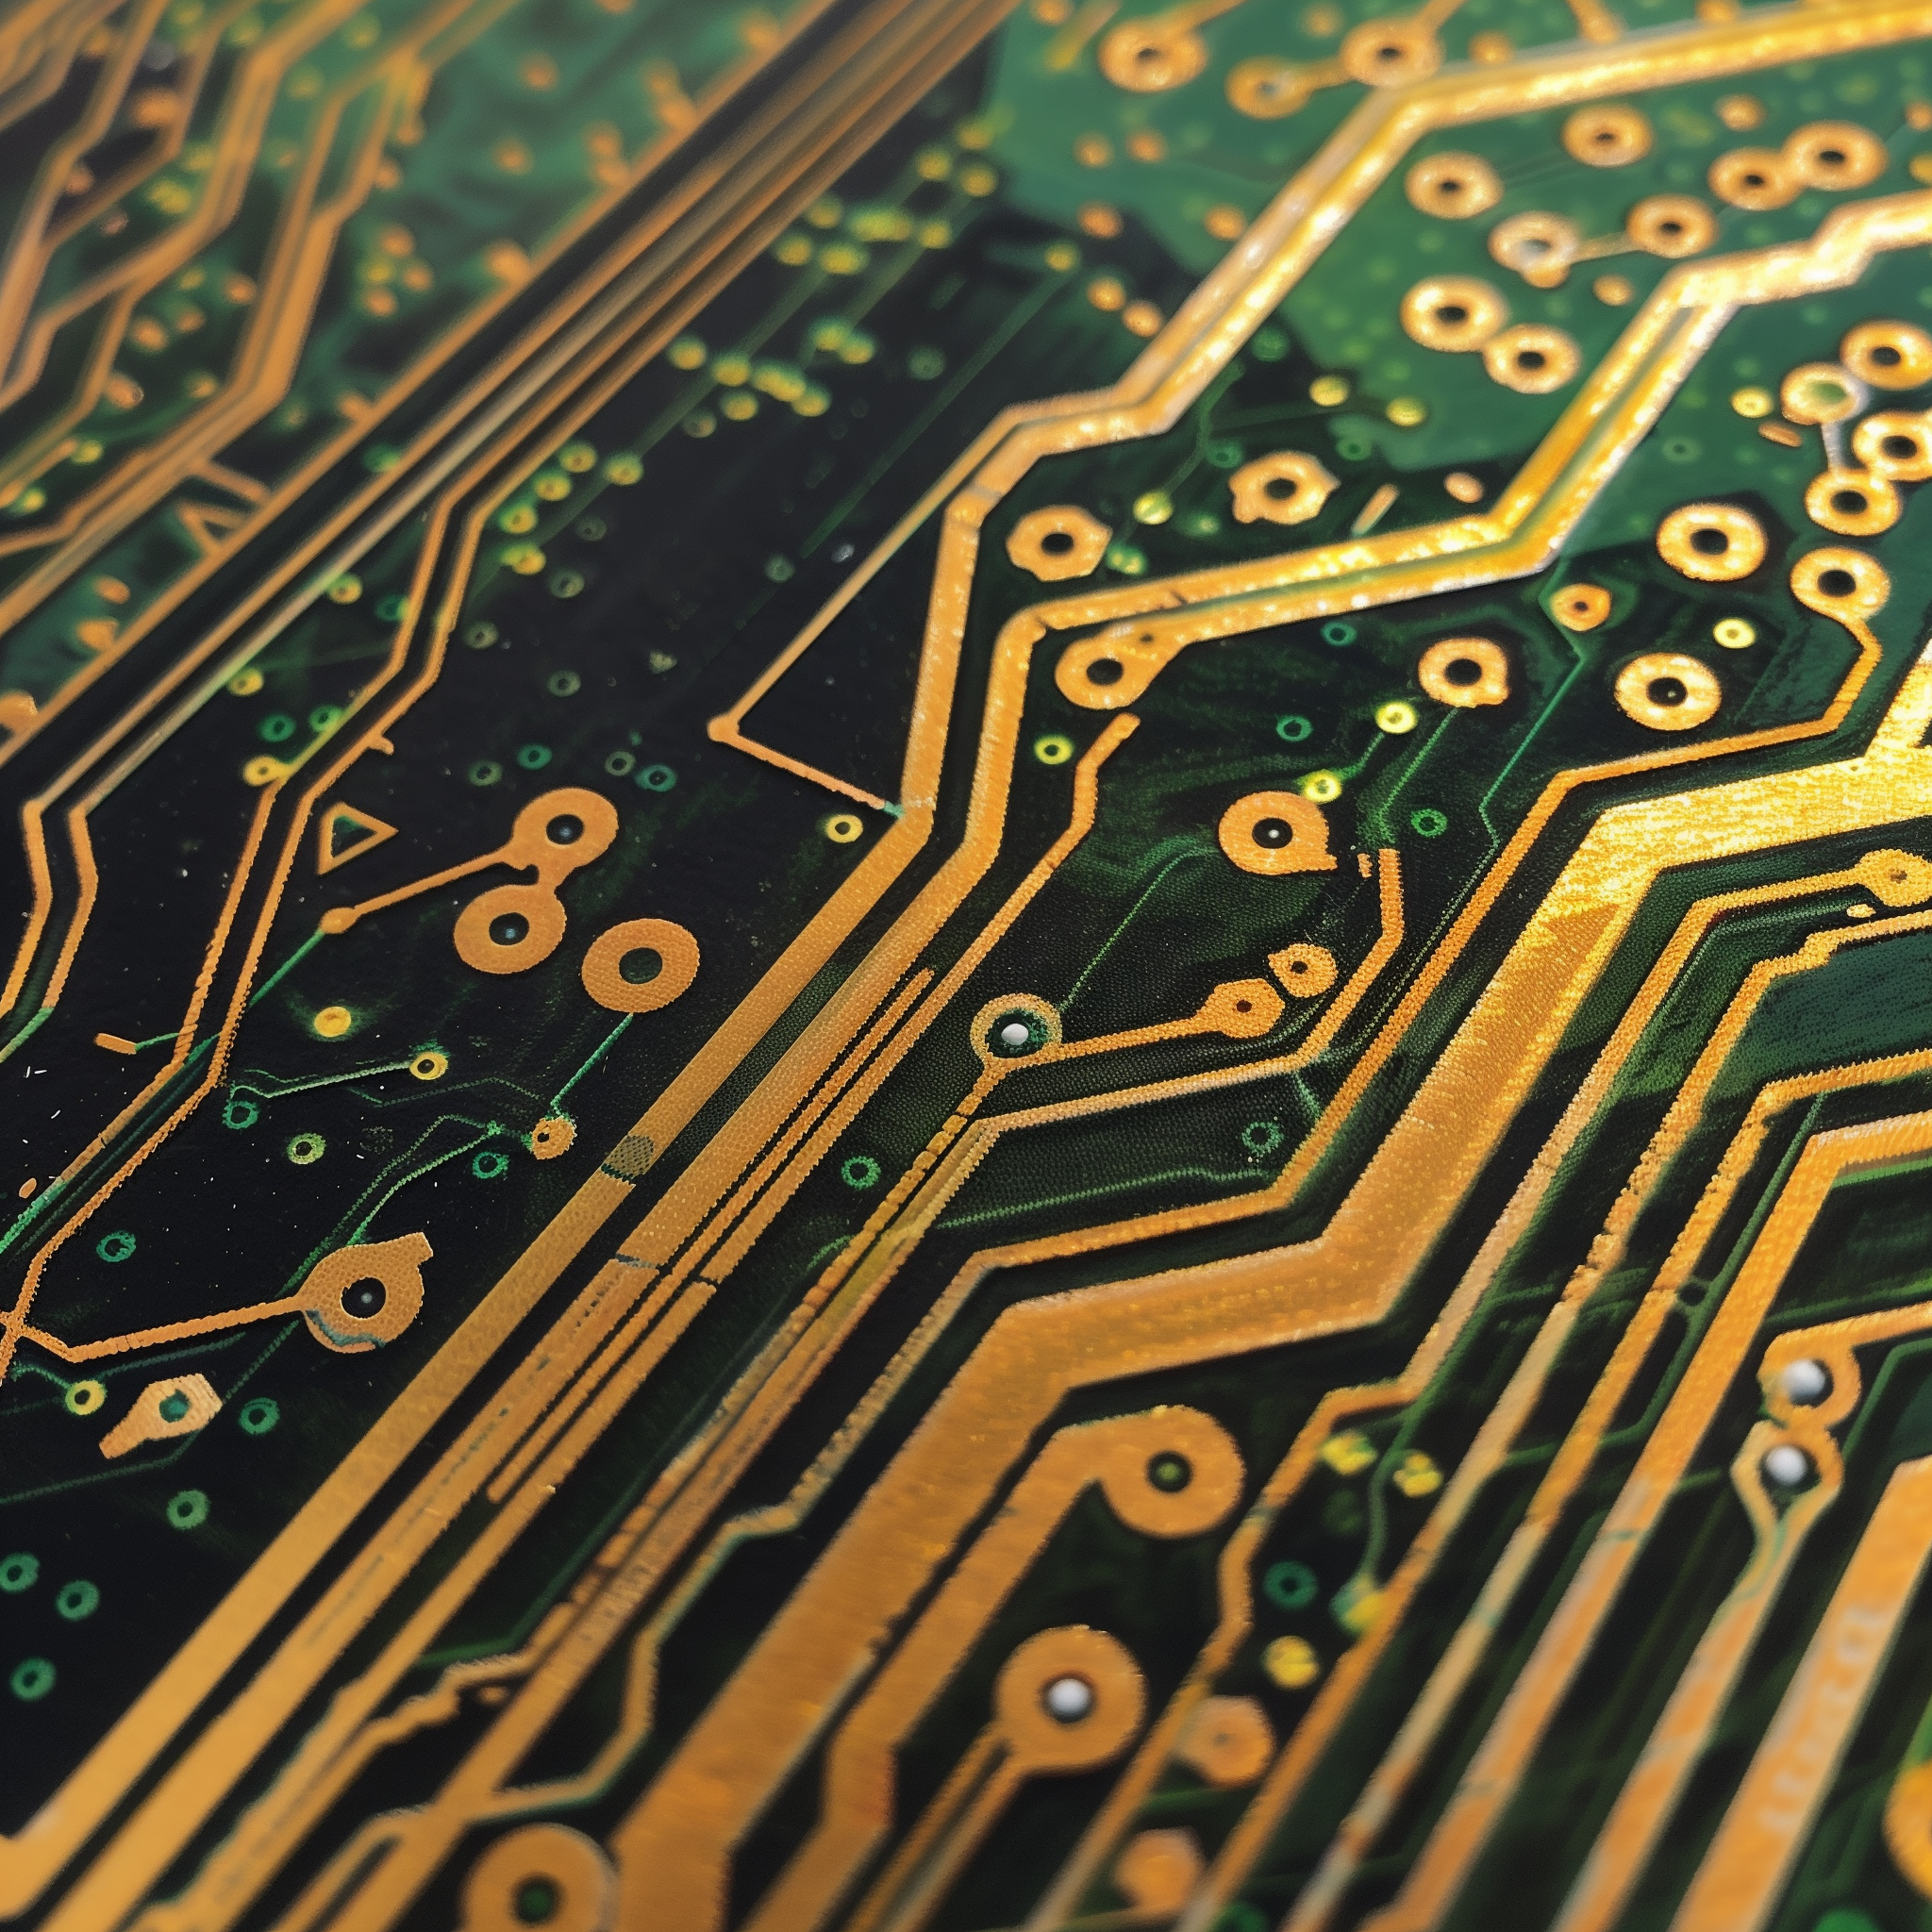 Close-up of a detailed circuit board pattern used as a profile avatar image.